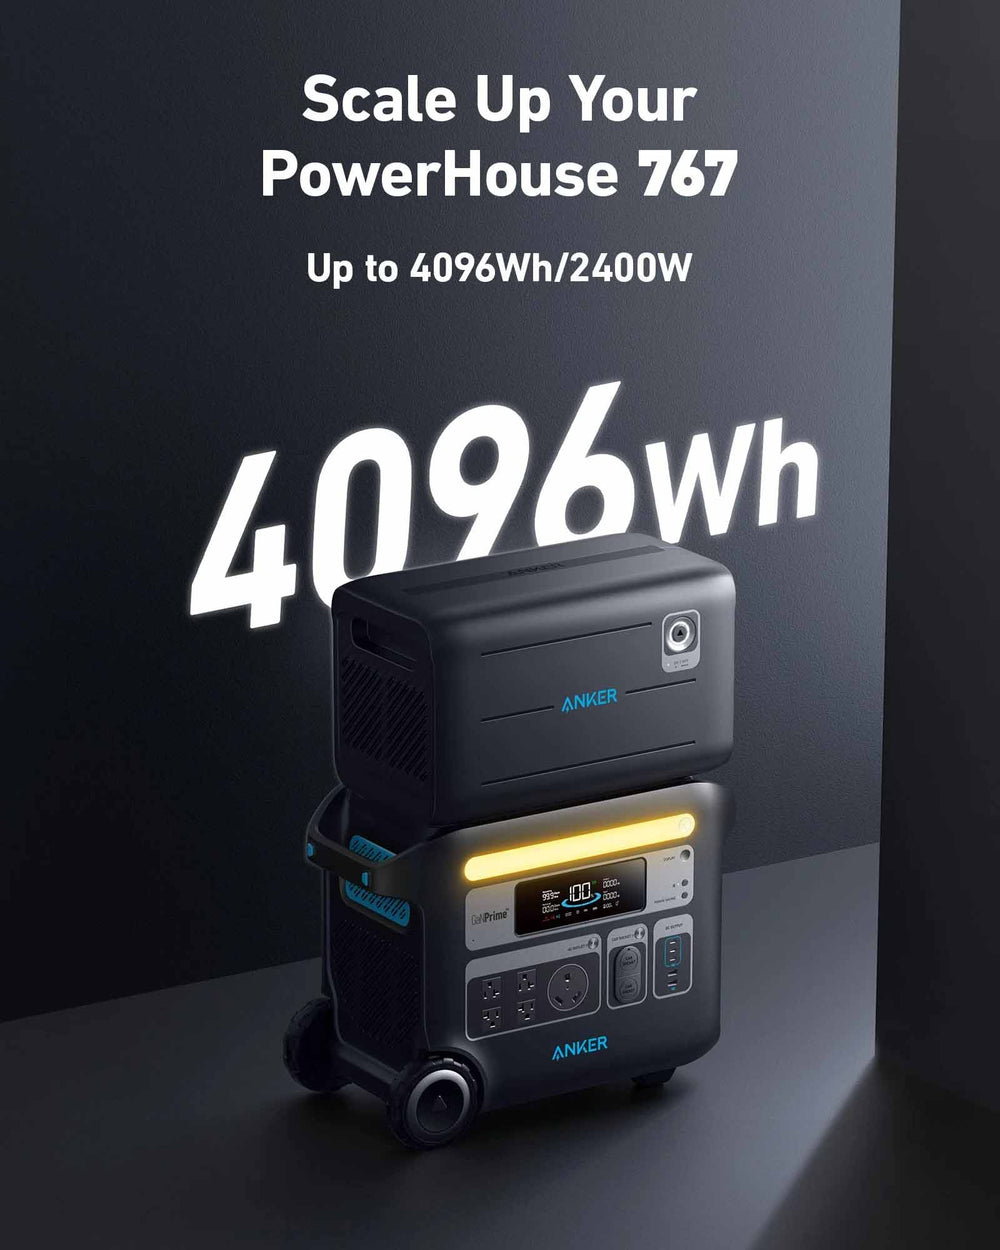 Scale Up Your PowerHouse 767 To 4096Wh